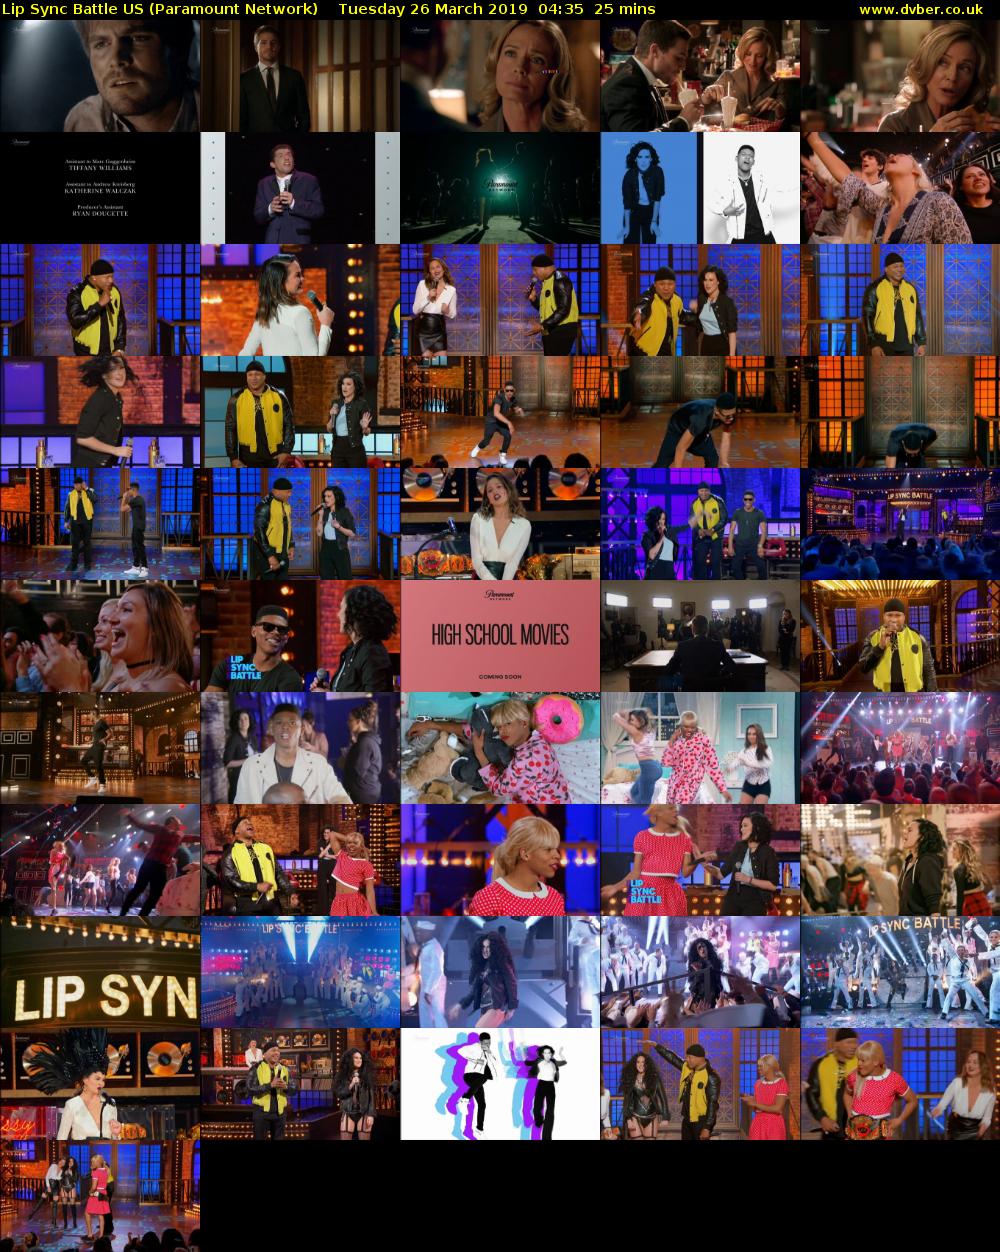 Lip Sync Battle US (Paramount Network) Tuesday 26 March 2019 04:35 - 05:00